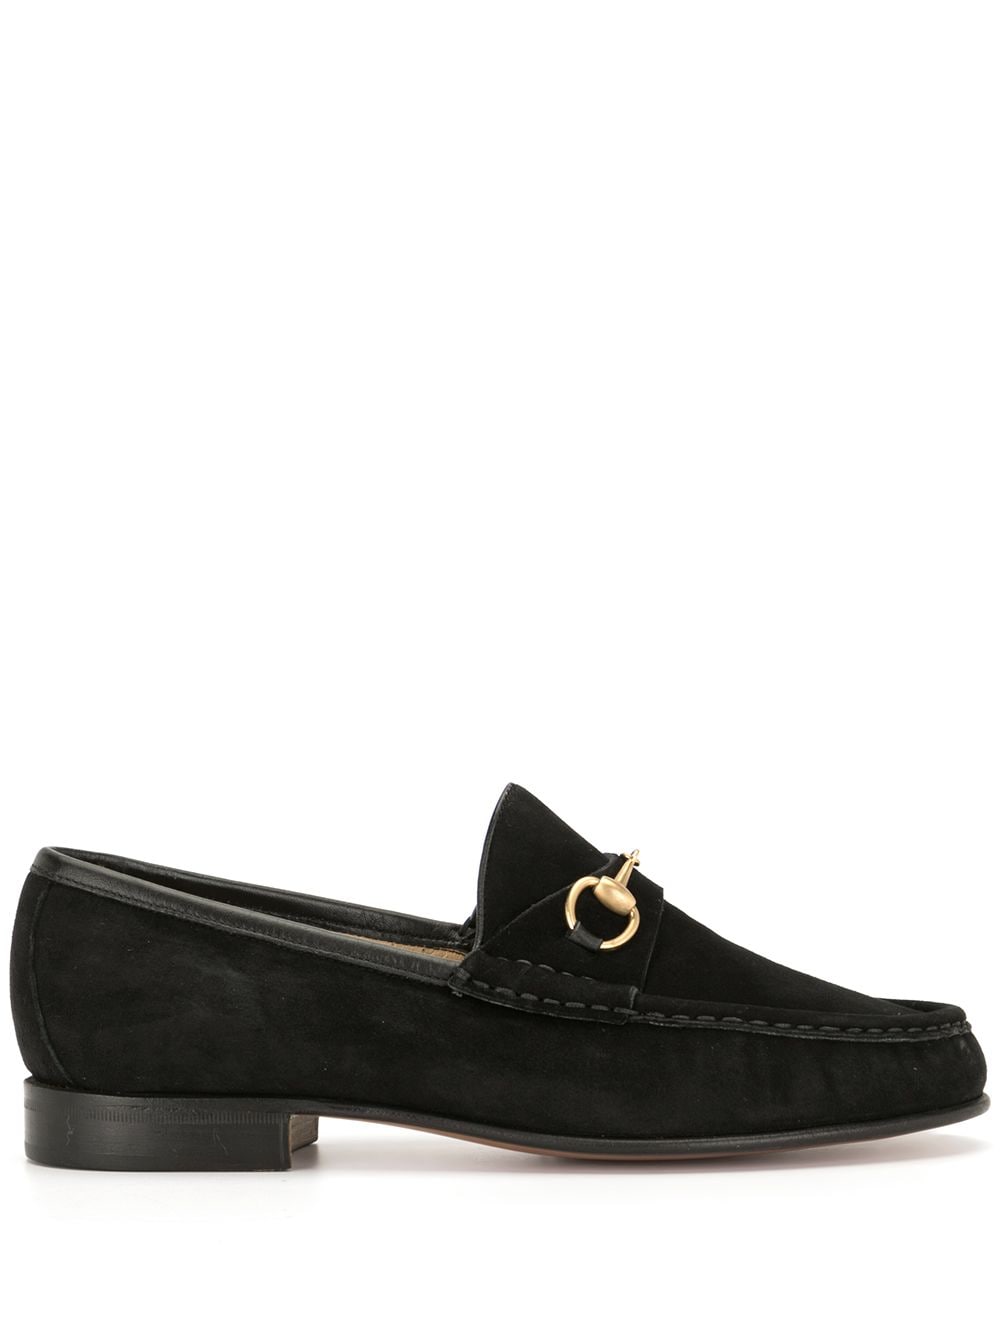 Pre-owned Gucci 2000s Horsebit Detail Loafers In Black